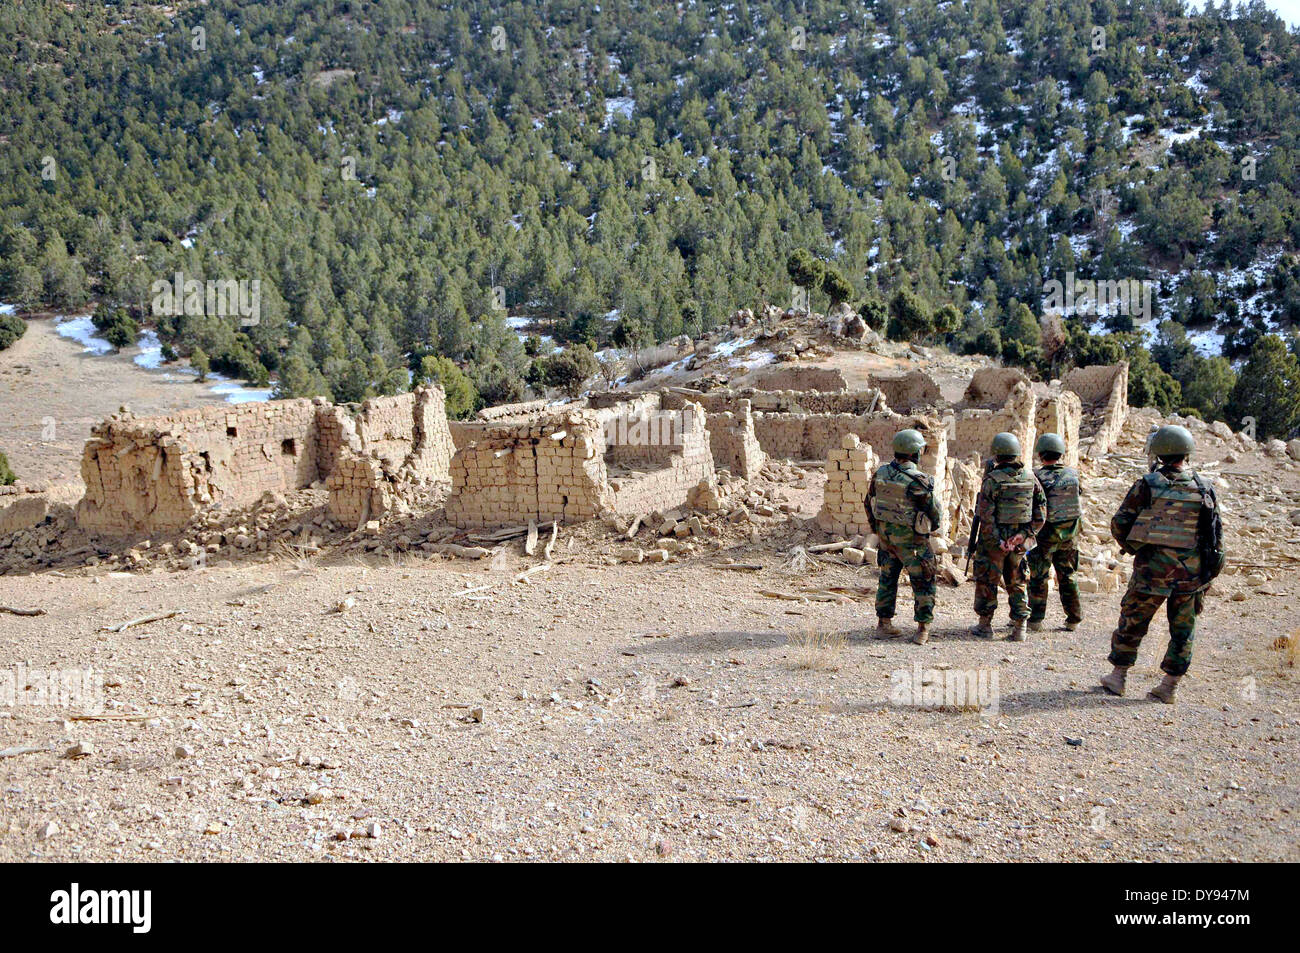 Afghan National Army soldiers view the rubble left behind after US soldiers placed C-4 explosive charges inside a wall to destroy a Taliban safe house once used by insurgent fighters December 18, 2009 in Khost province, Afghanistan. Stock Photo